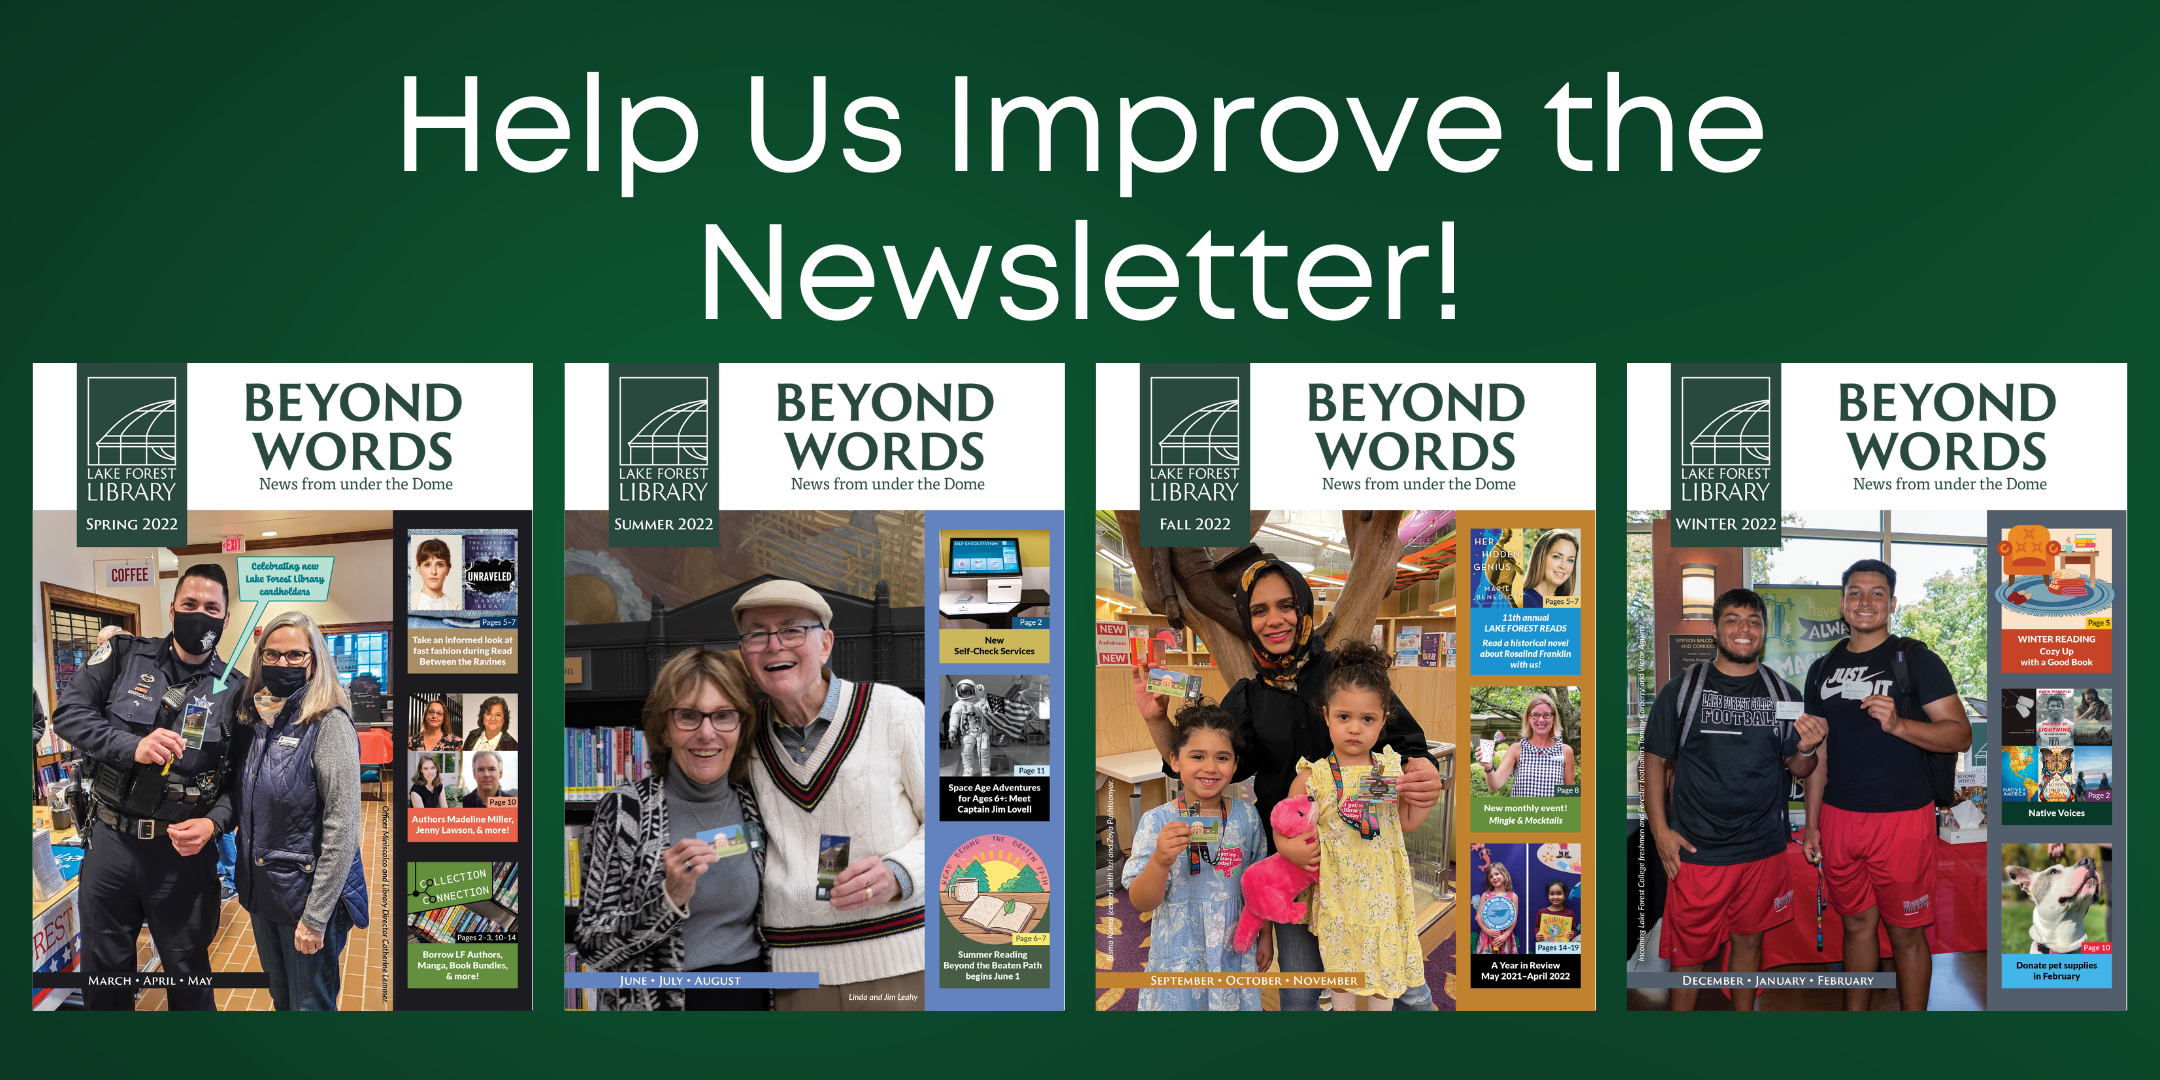 image of "Help Us Improve the Newsletter"